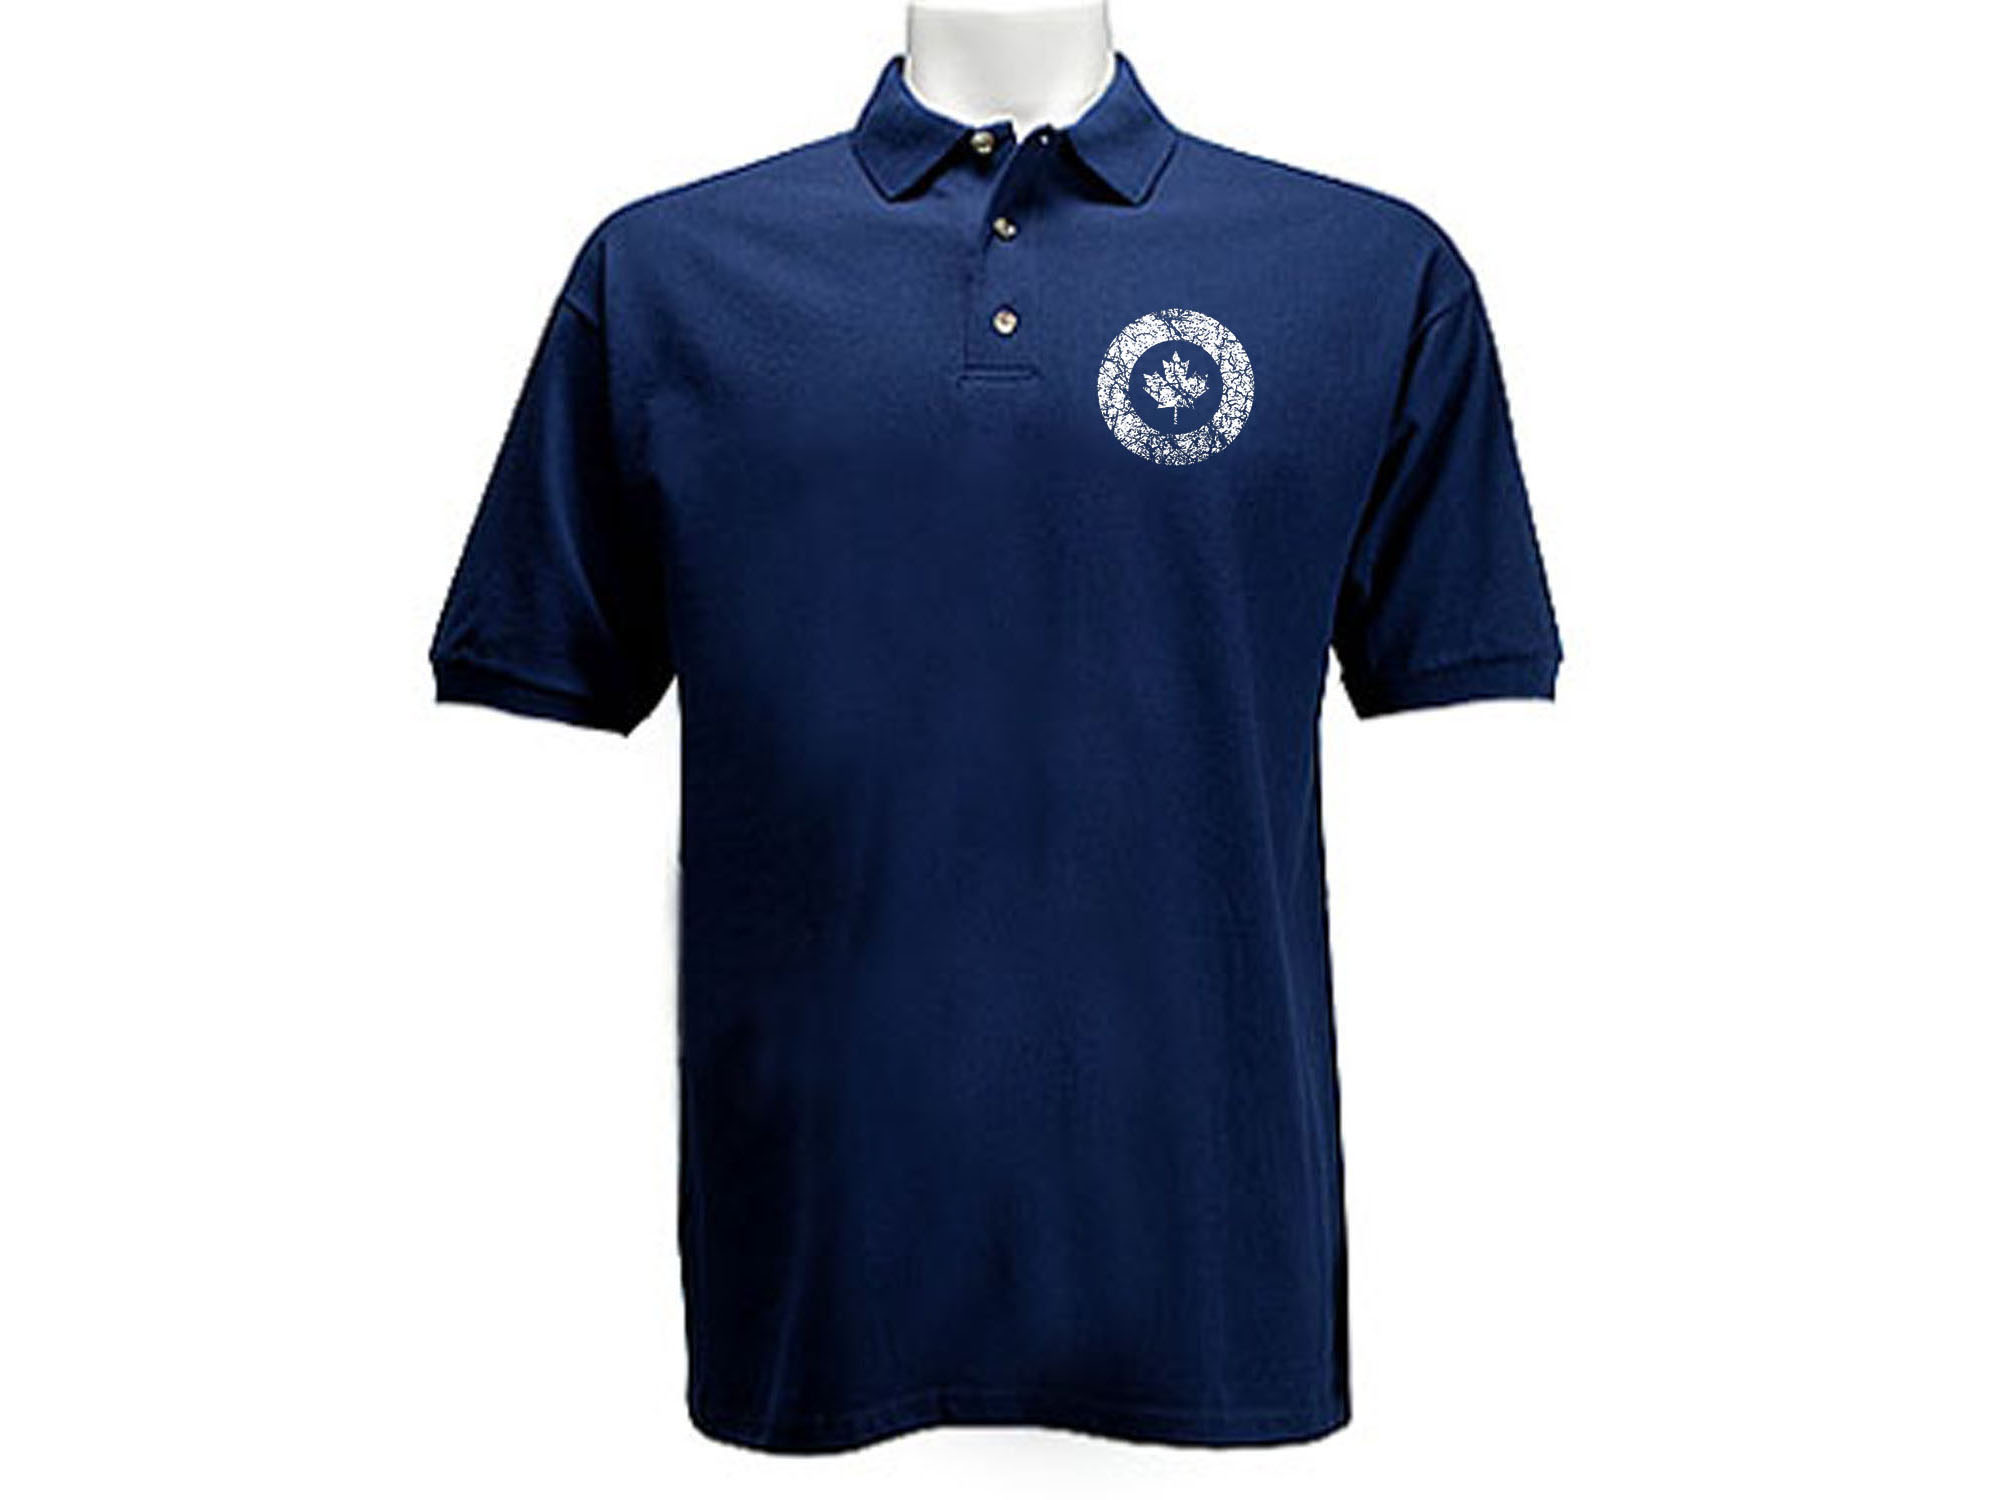 Canadian Air Force retro emblem distressed look polo t-shirt